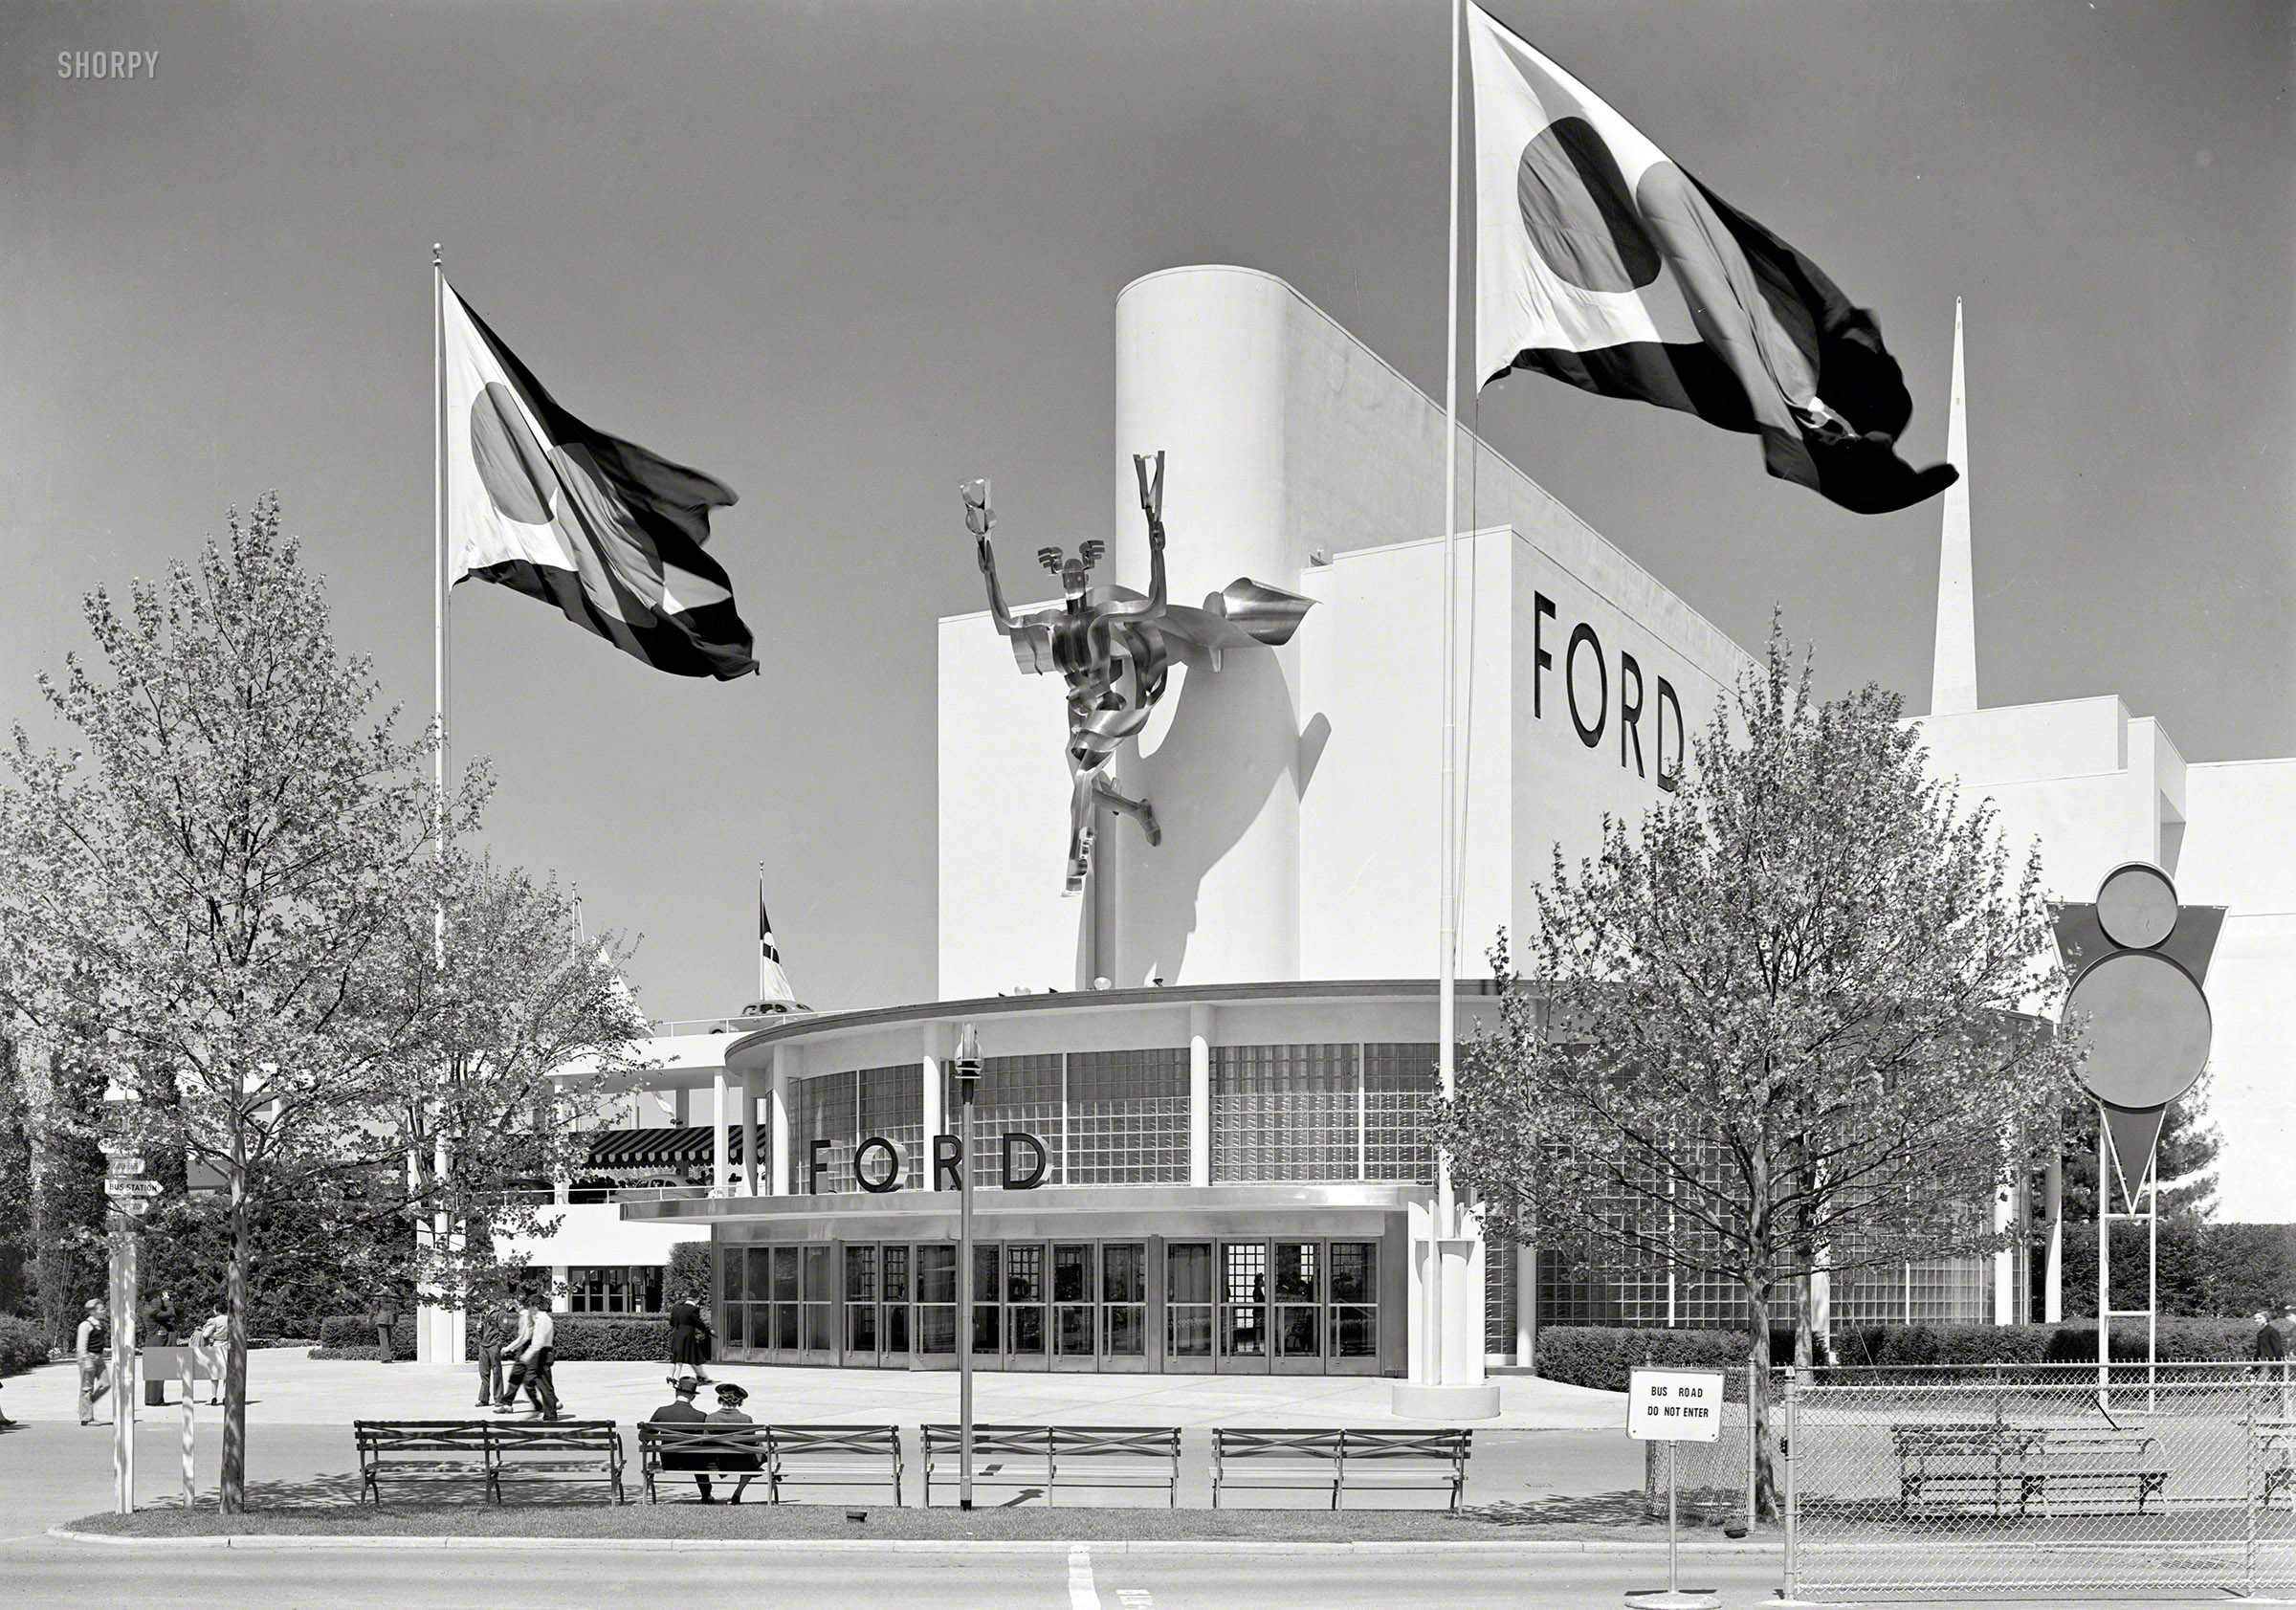 May 12, 1939. "New York World's Fair, Ford Motor Building. Entrance." The stainless steel sculpture of a V8-brandishing Mercury was by Robert Foster. Large-format acetate negative by Gottscho-Schleisner. View full size.